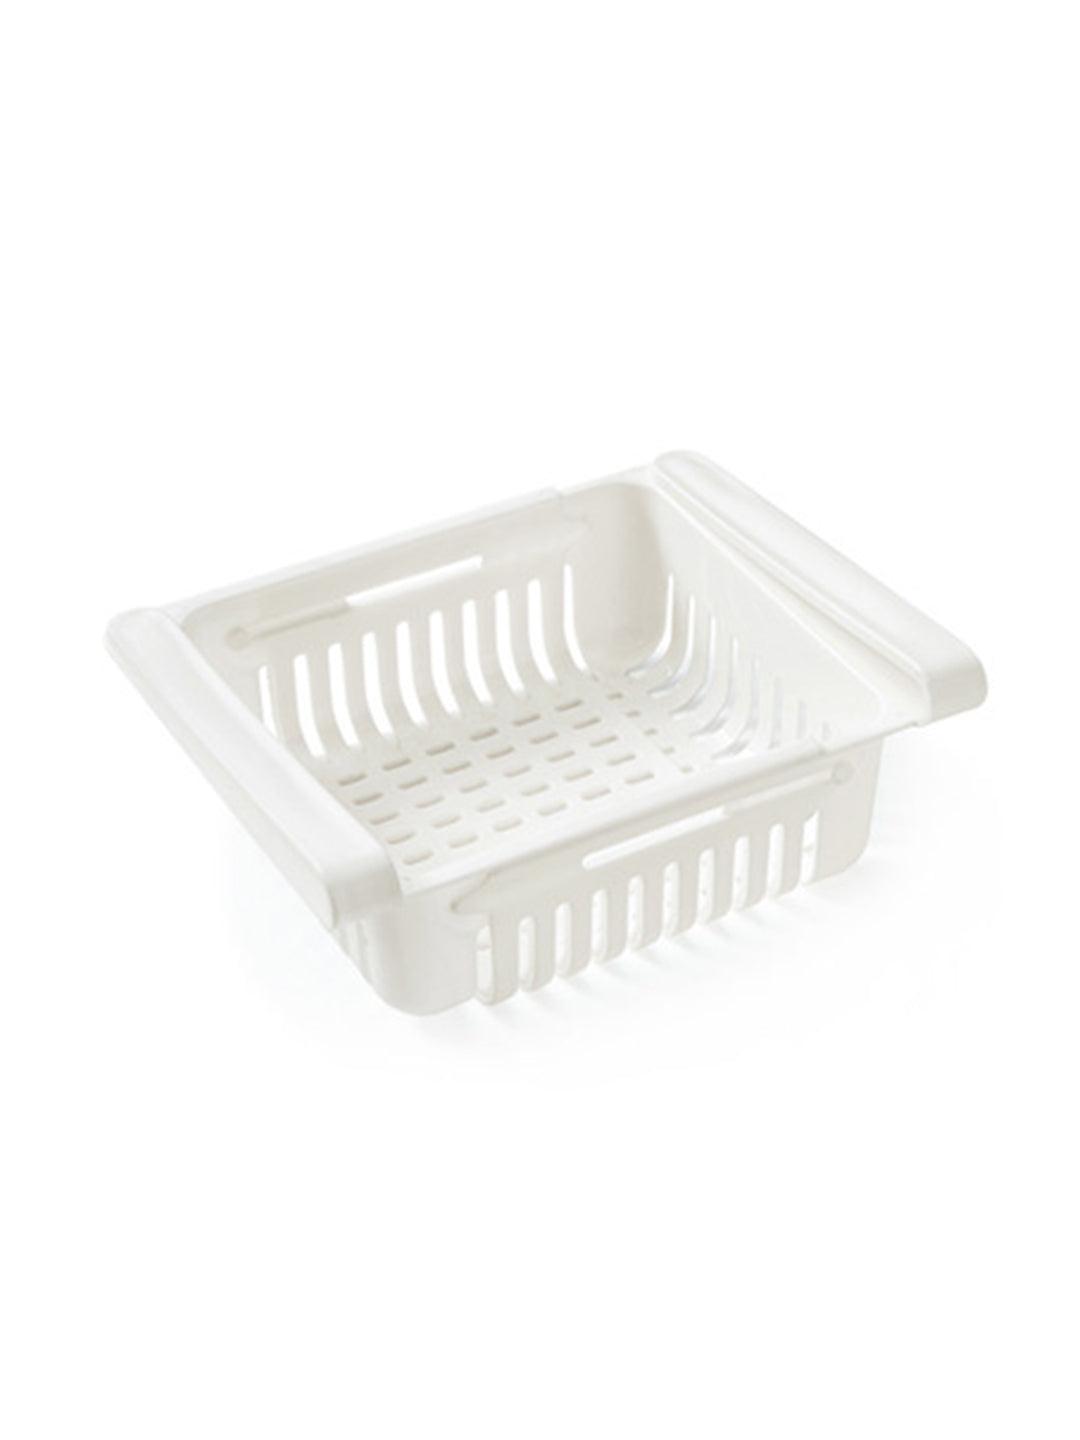 Buy White Kitchen Organisers for Home & Kitchen by Market 99